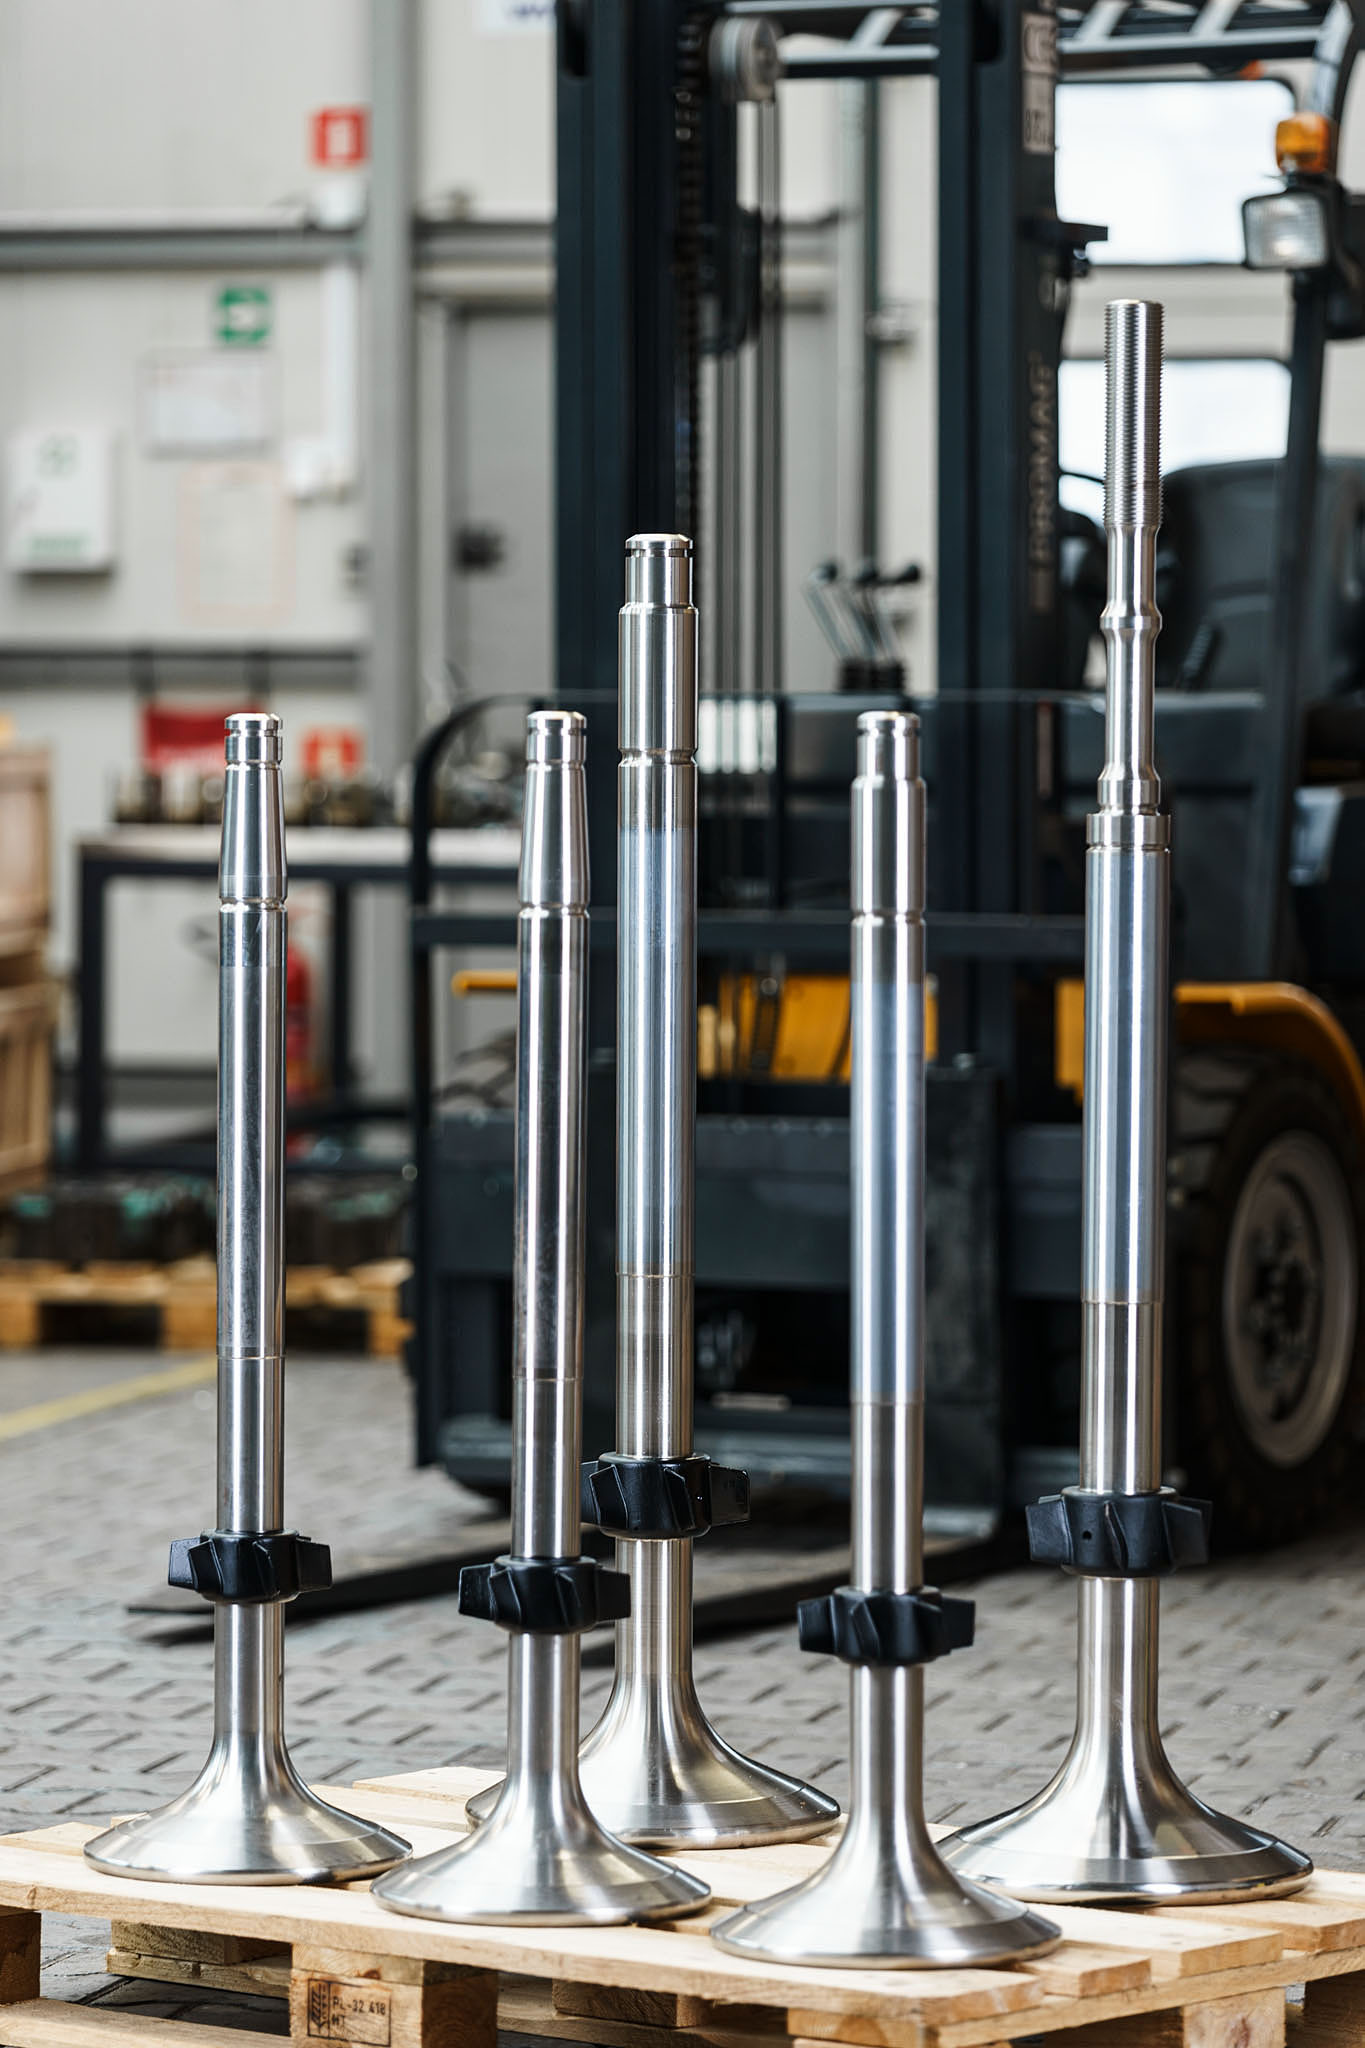 Ship engine valves from the Authorized MAN & Wartsila factories